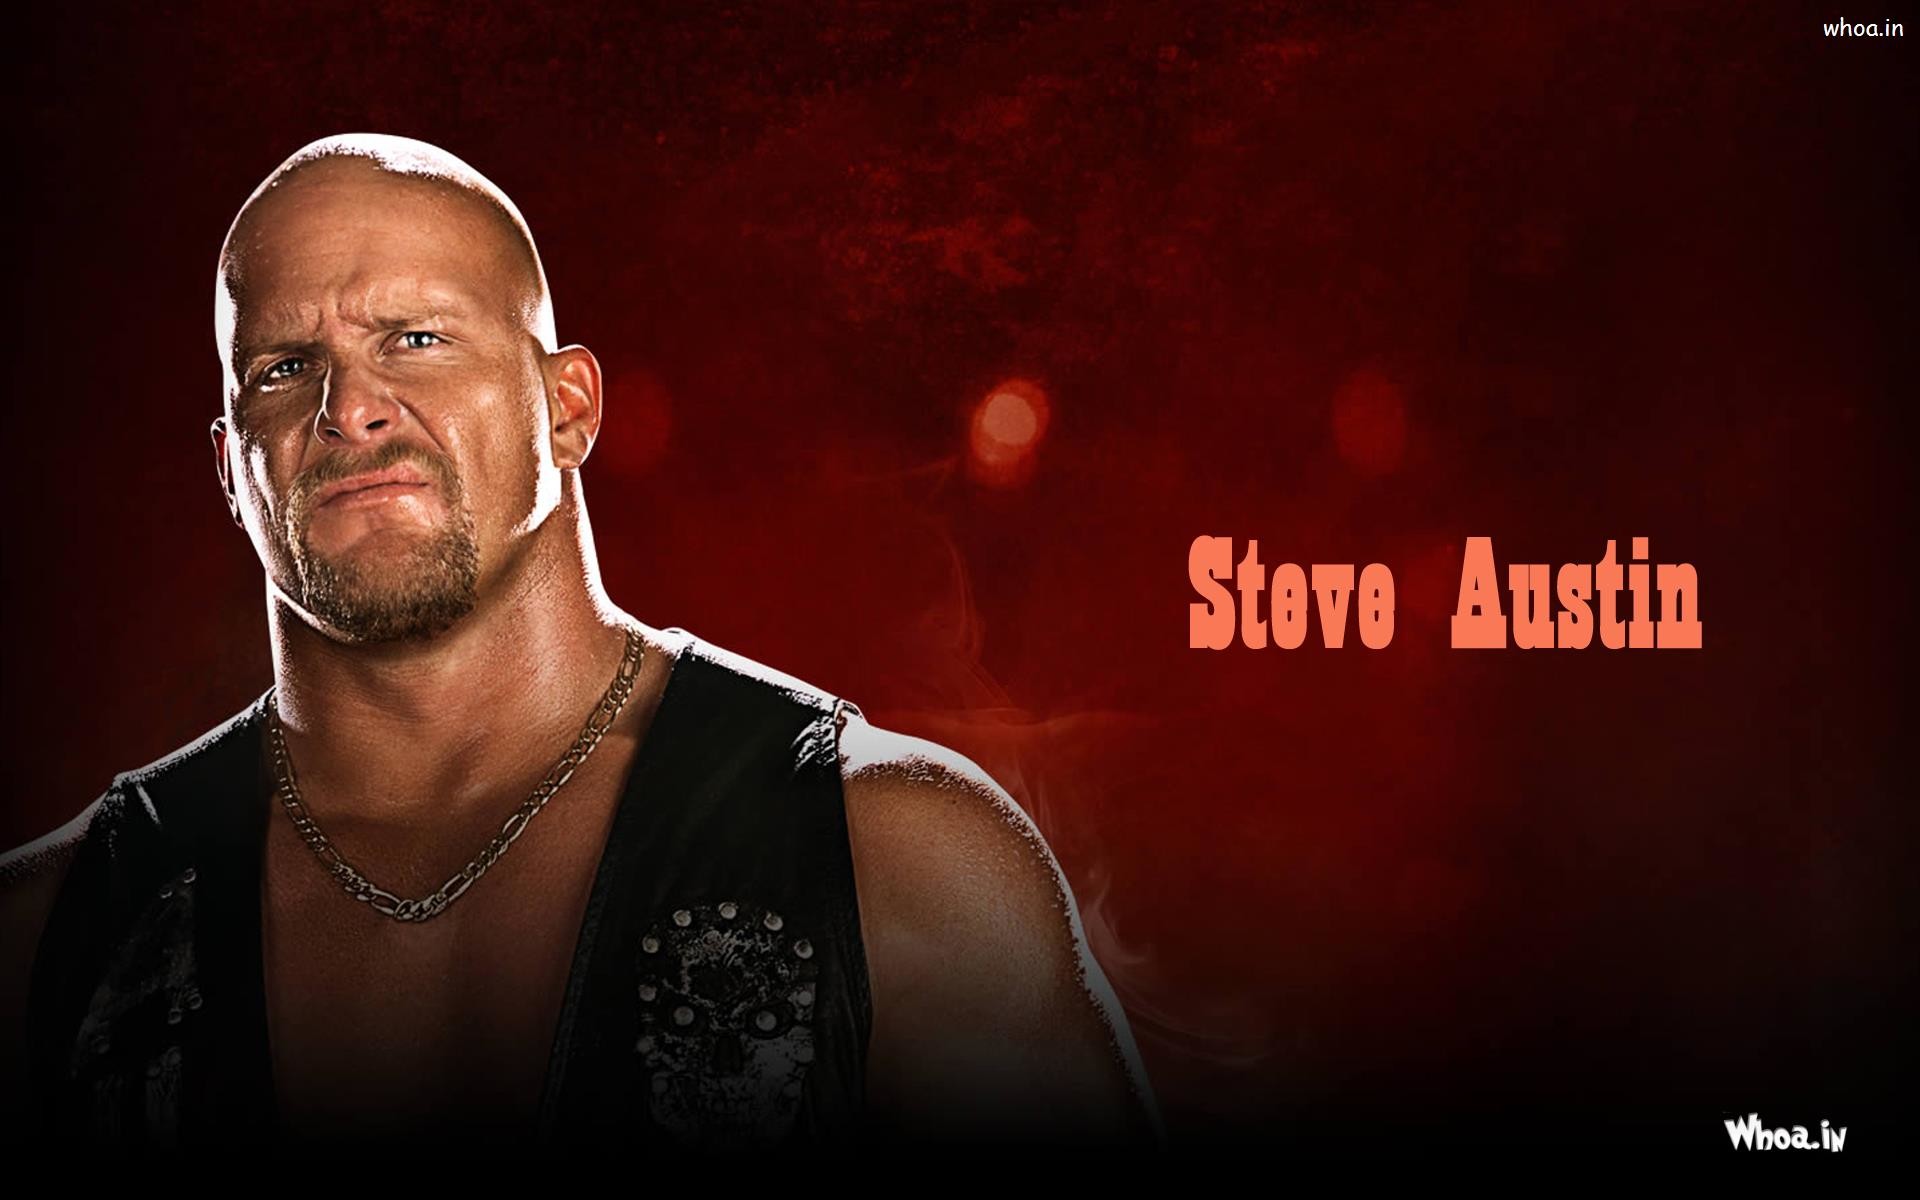 Stone cold steve austin hd images 8 Stone Cold Steve Austin HD Images Pinterest Stone cold steve, Steve austin and Hd images